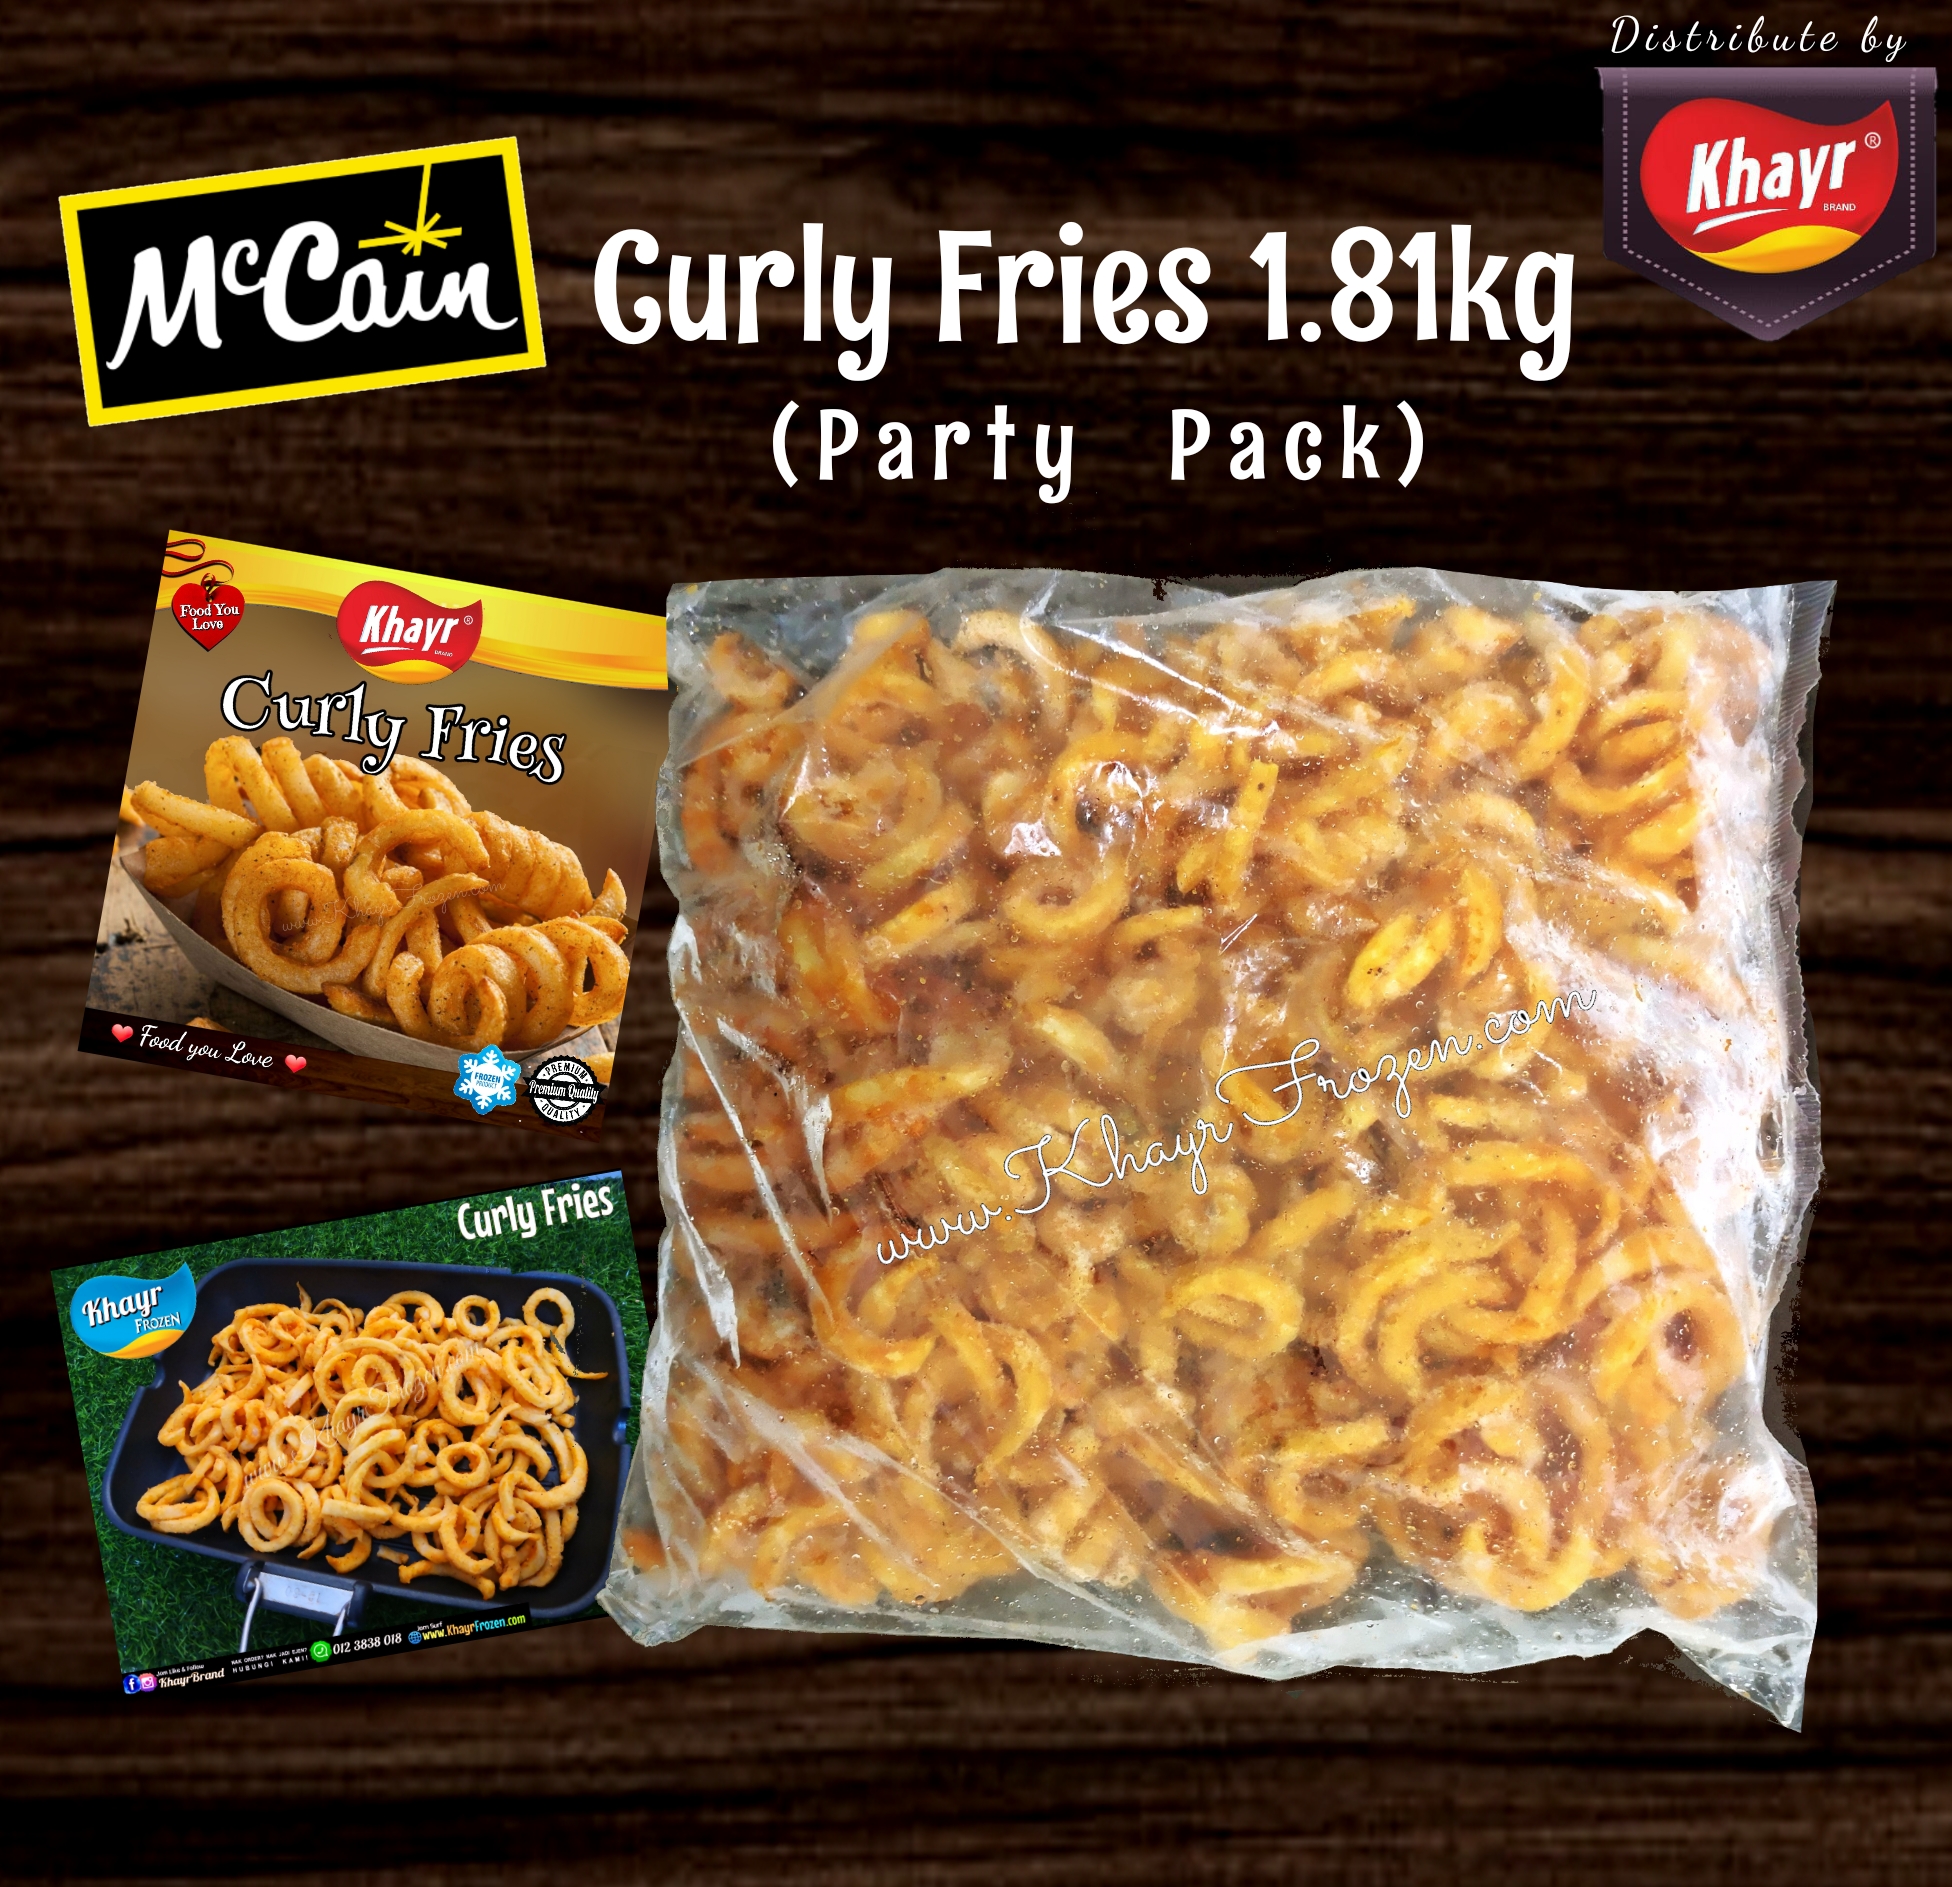 McCain Curly Fries Party Pack (1.81kg)